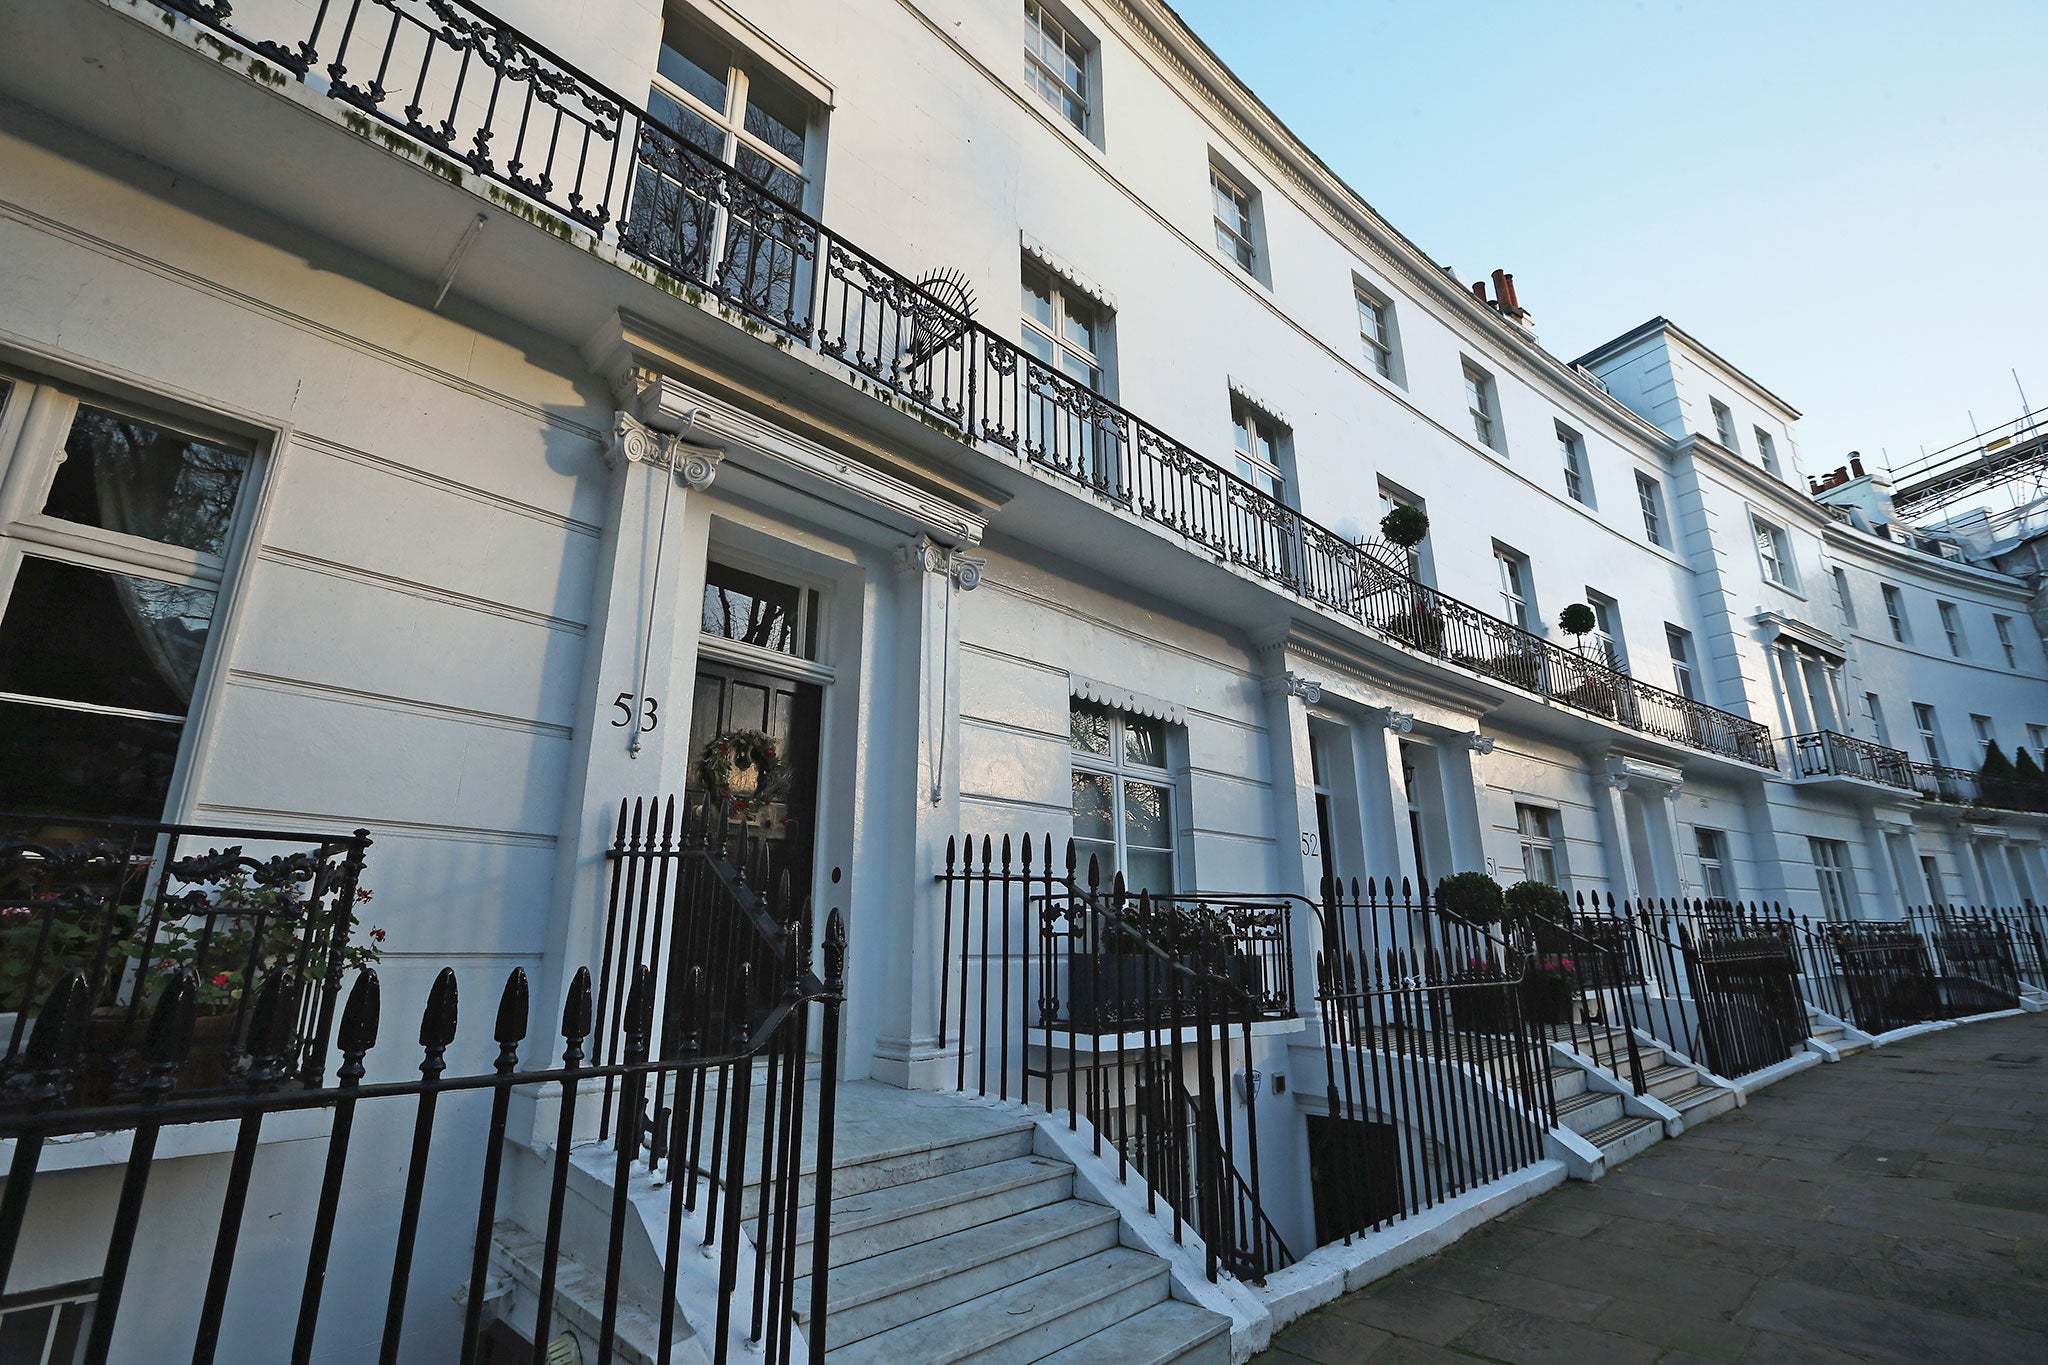 Kensington and Chelsea is the only area in Britain with an average price per square metre above £10,000